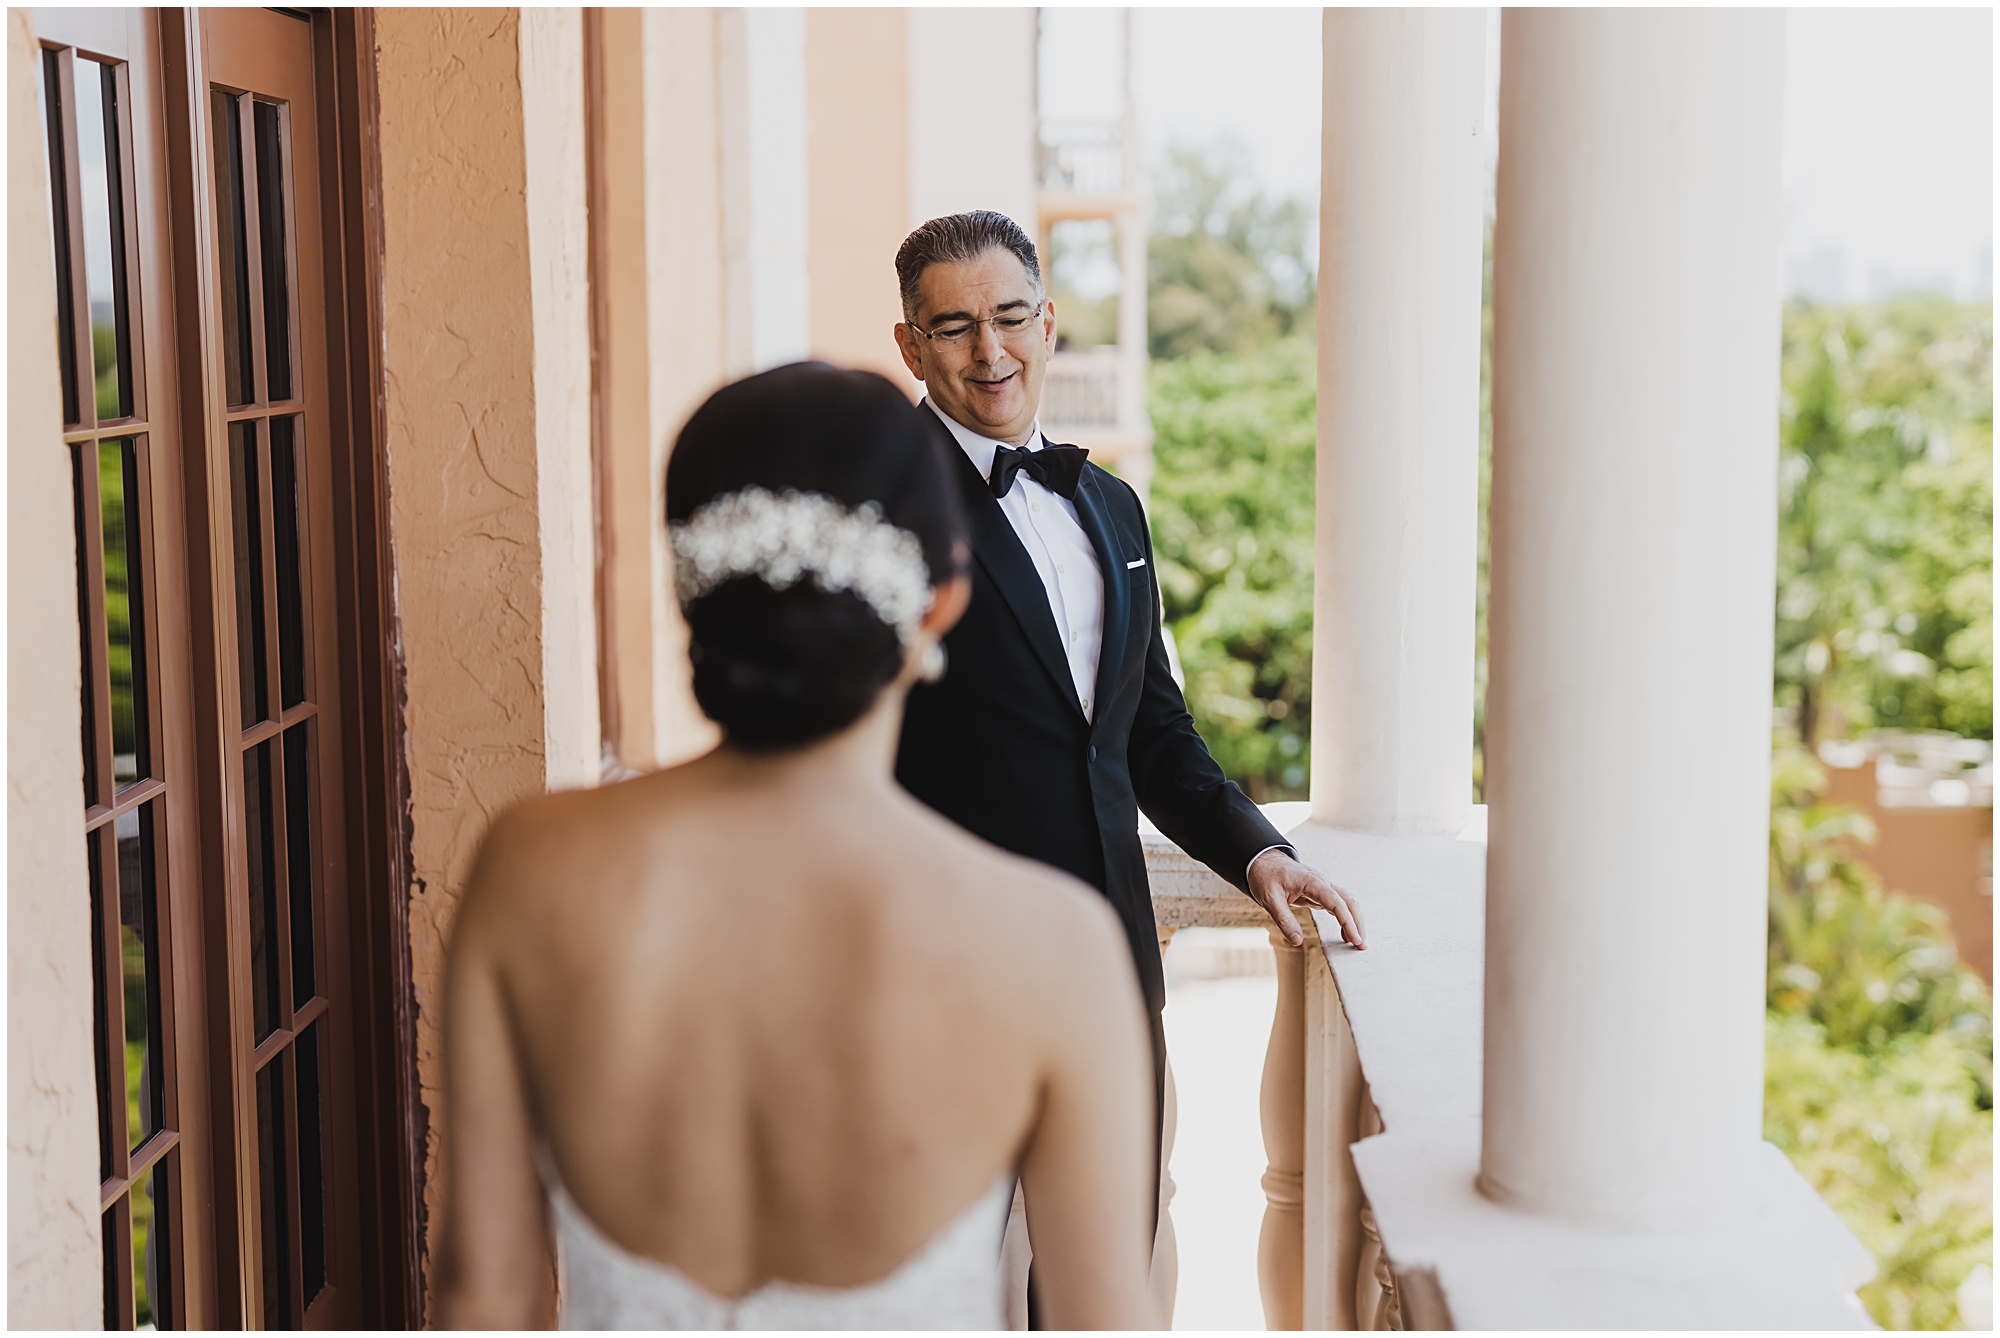 First look of the bride with her father at the Biltmore Hotel in Coral gables.